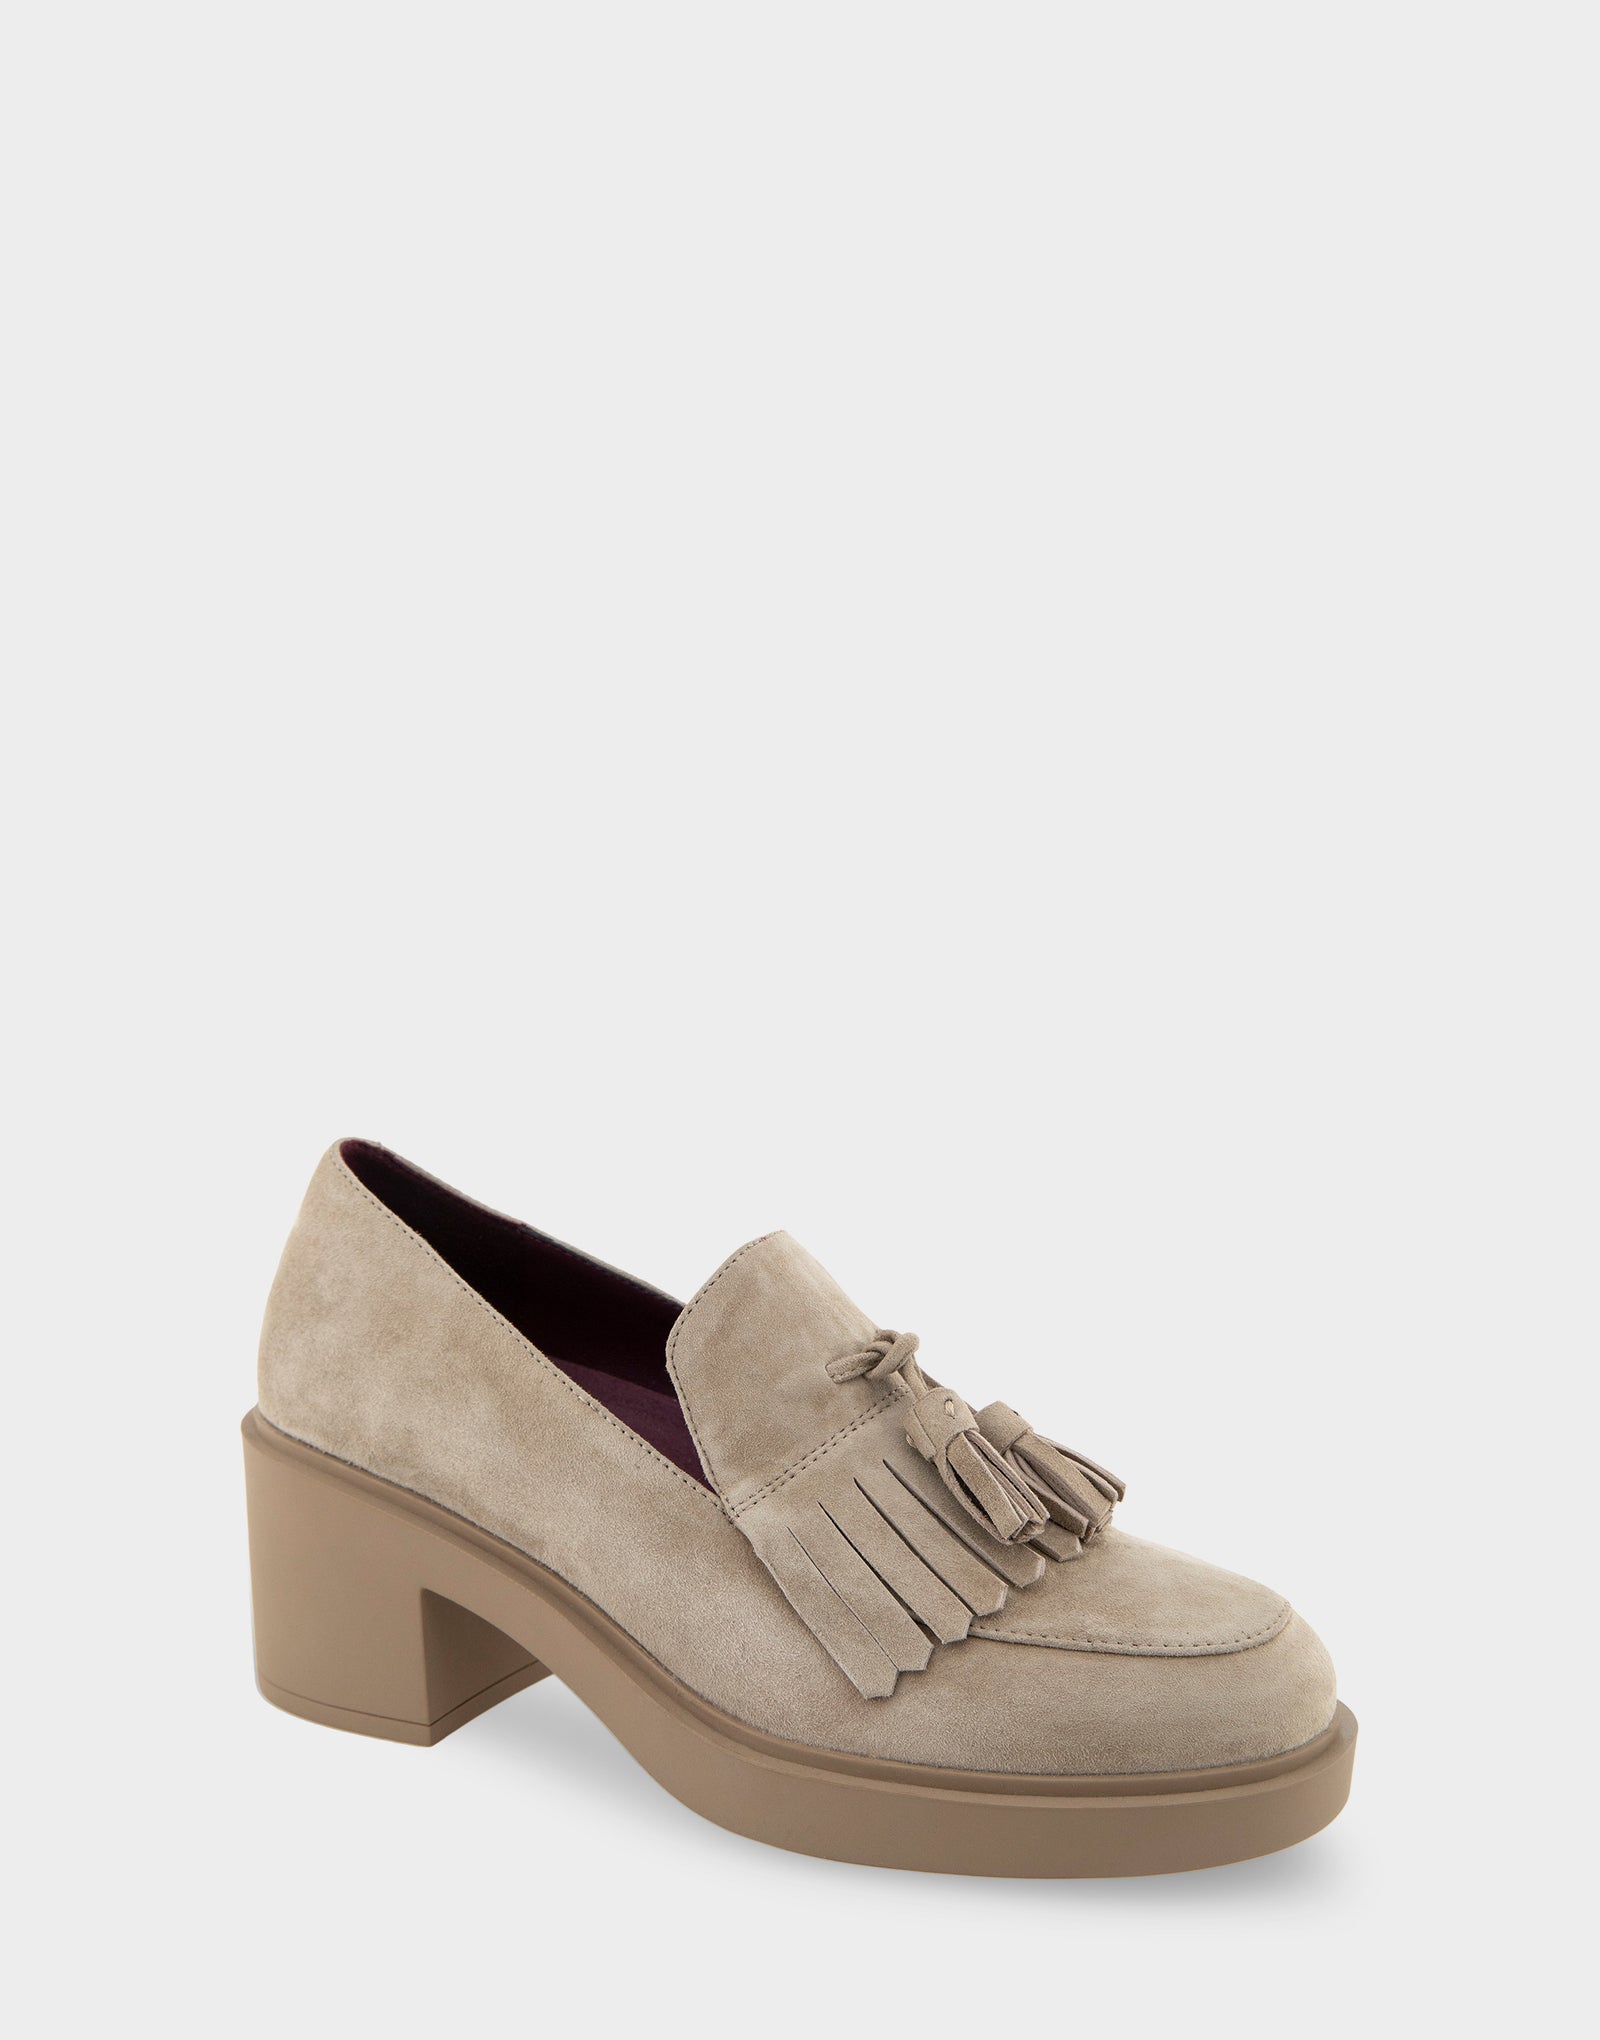 Buy Wedge-Heeled Loafers Online at Best Prices in India - JioMart.